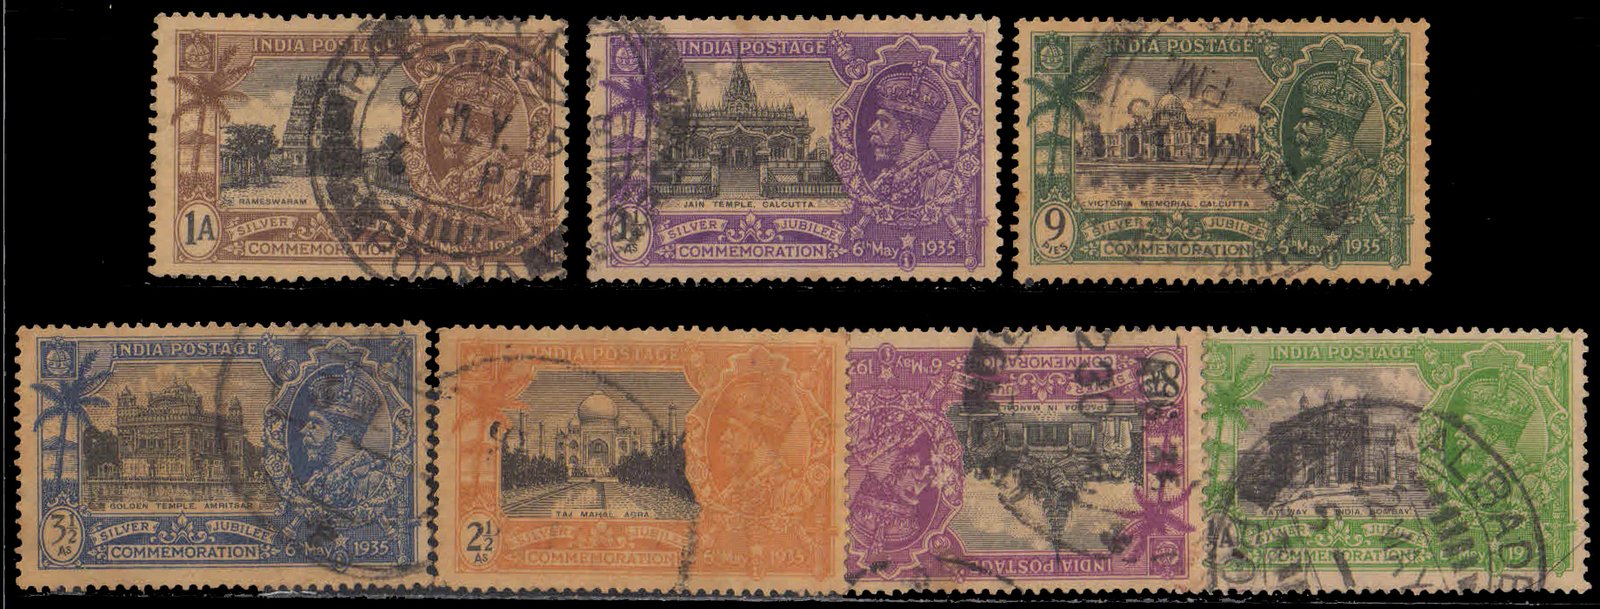 INDIA 1935 - Silver Jubilee of King George, Gateway of India, Victoria Memorial, Jain Temple, Taj Mahal, Golden Temple, Set of 7 Stamps, Used, As Per Scan